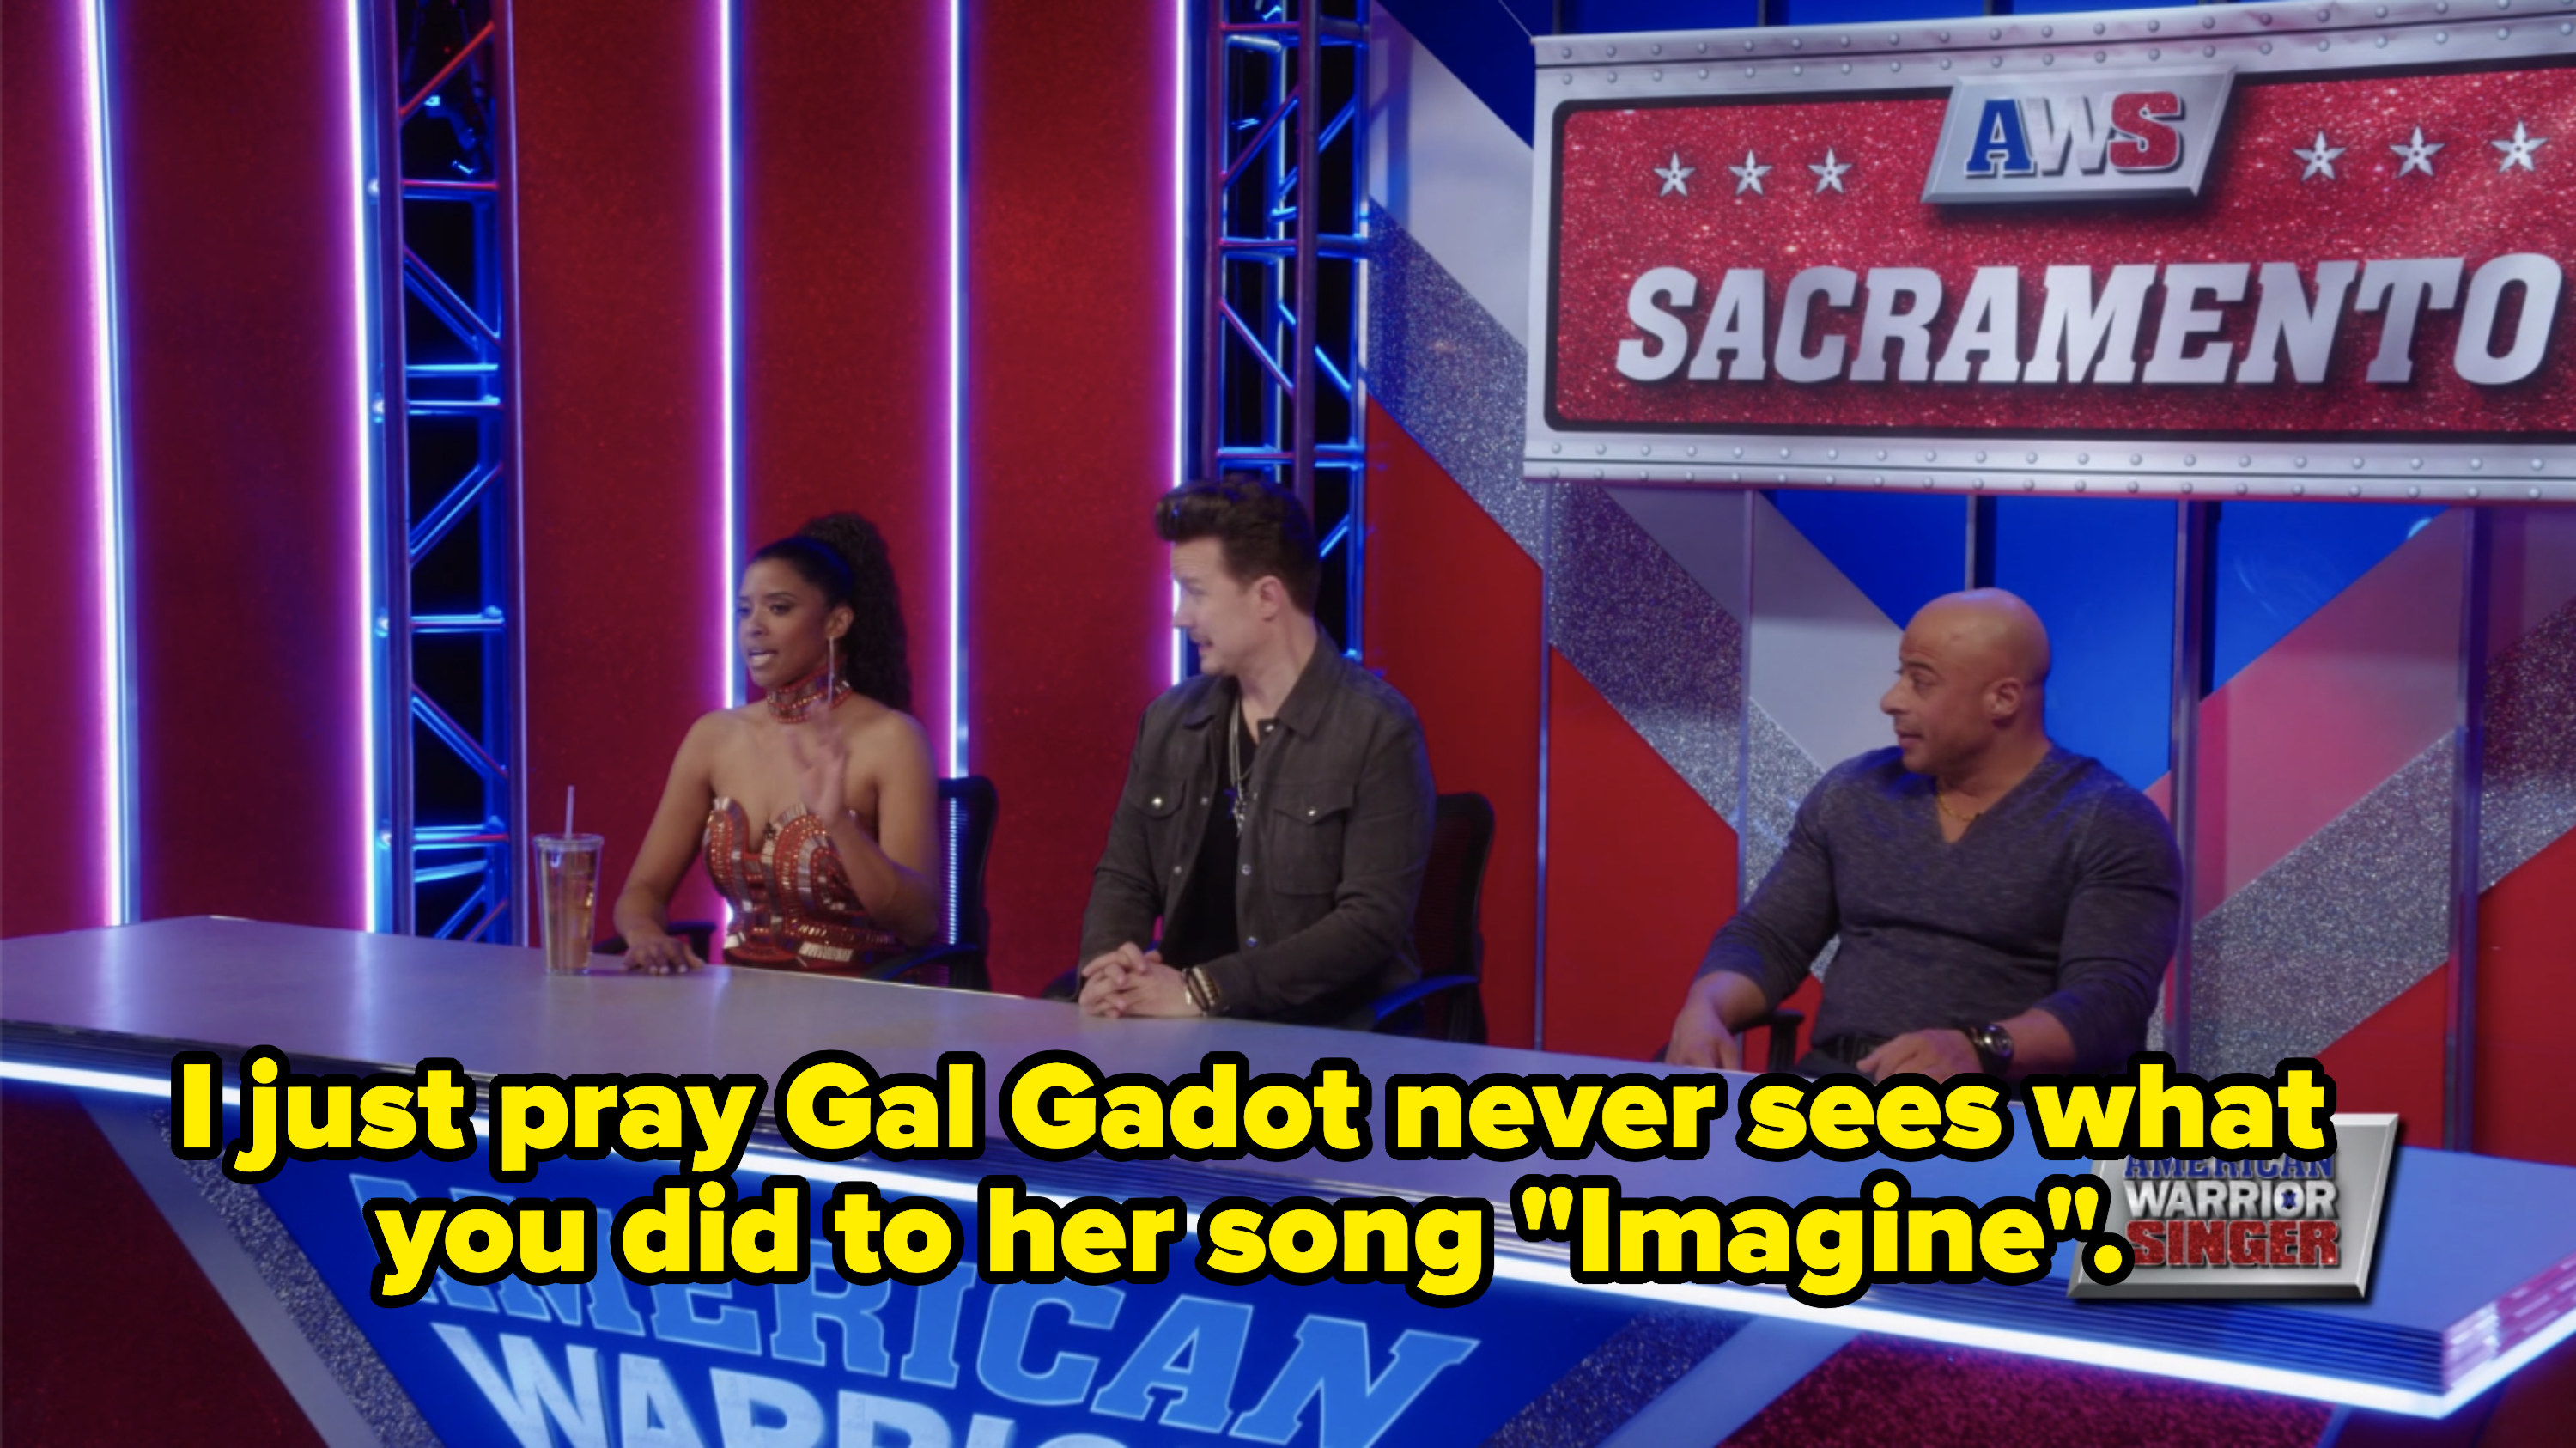 Wickie saying she prays Gal Gadot never sees what she did to the song &quot;Imagine&quot;